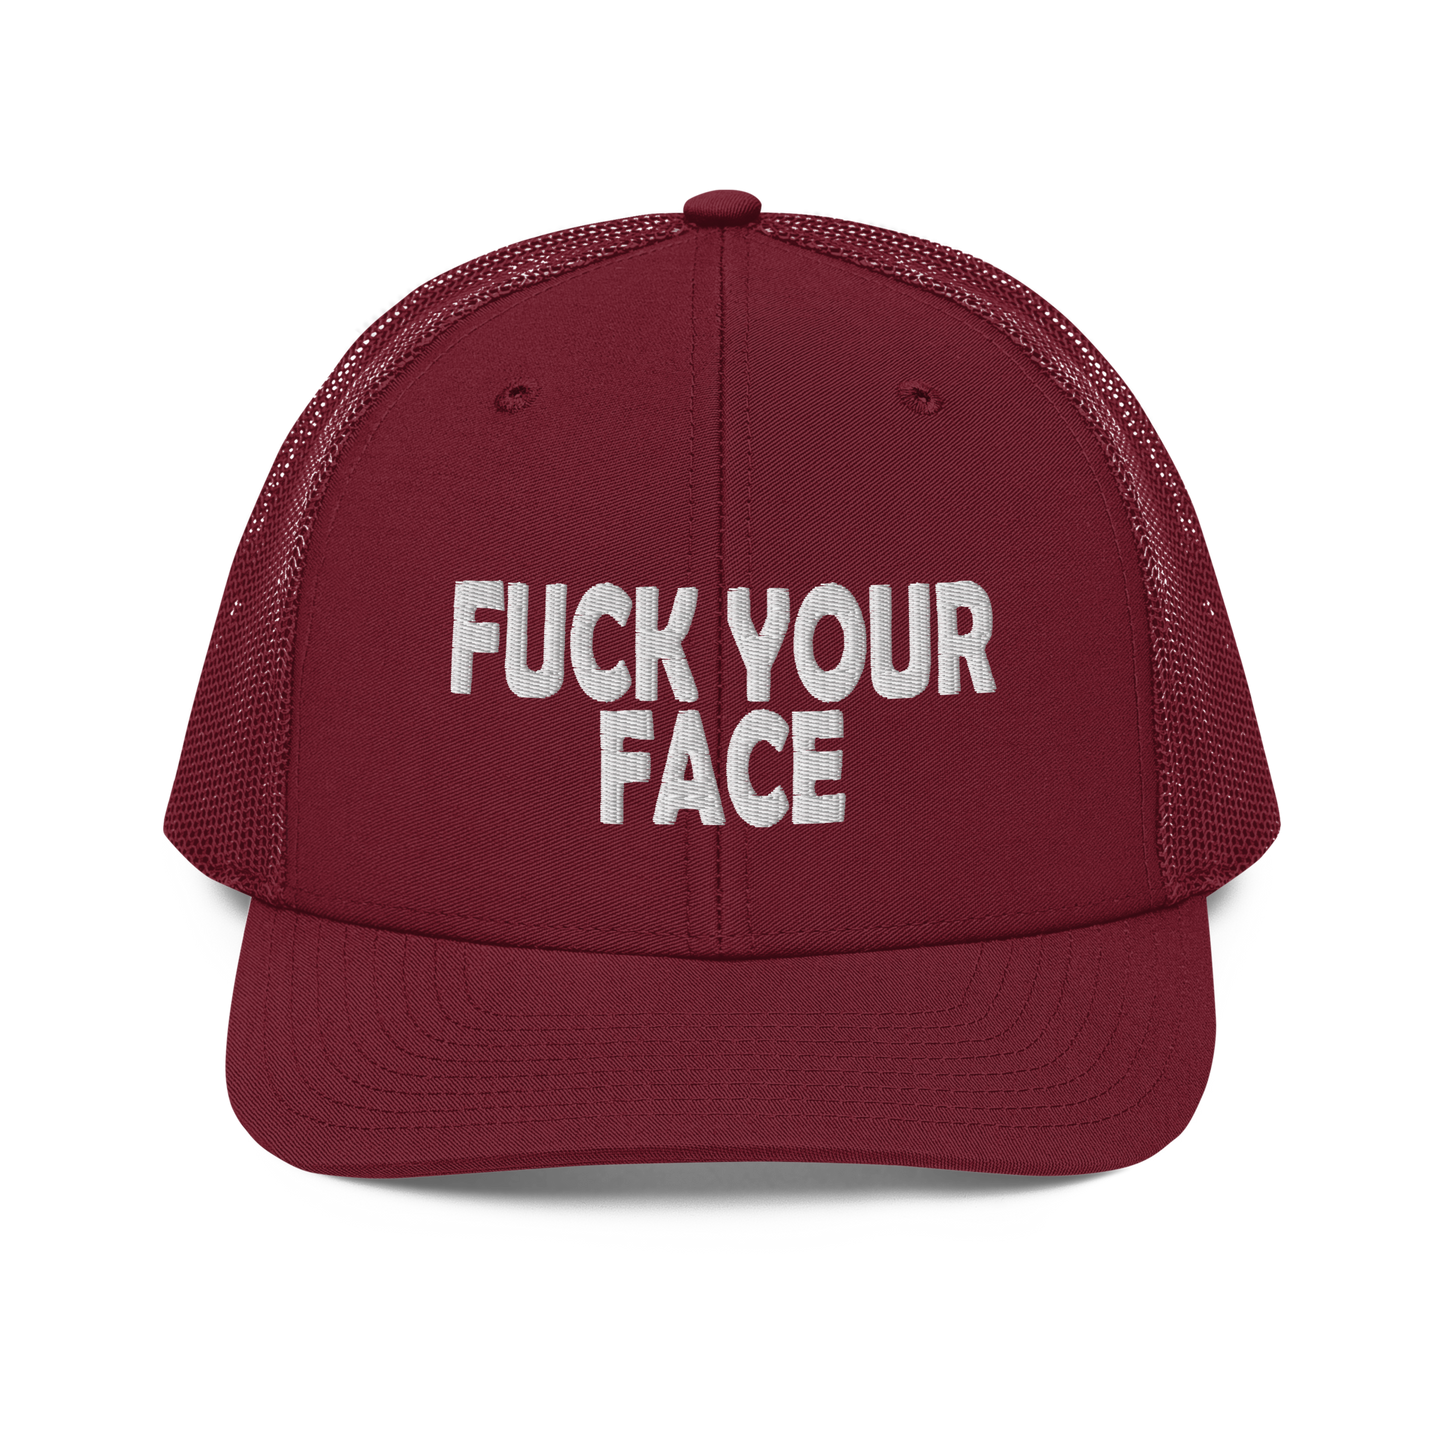 Fuck Your Face Embroidery 112 Snapback Cap